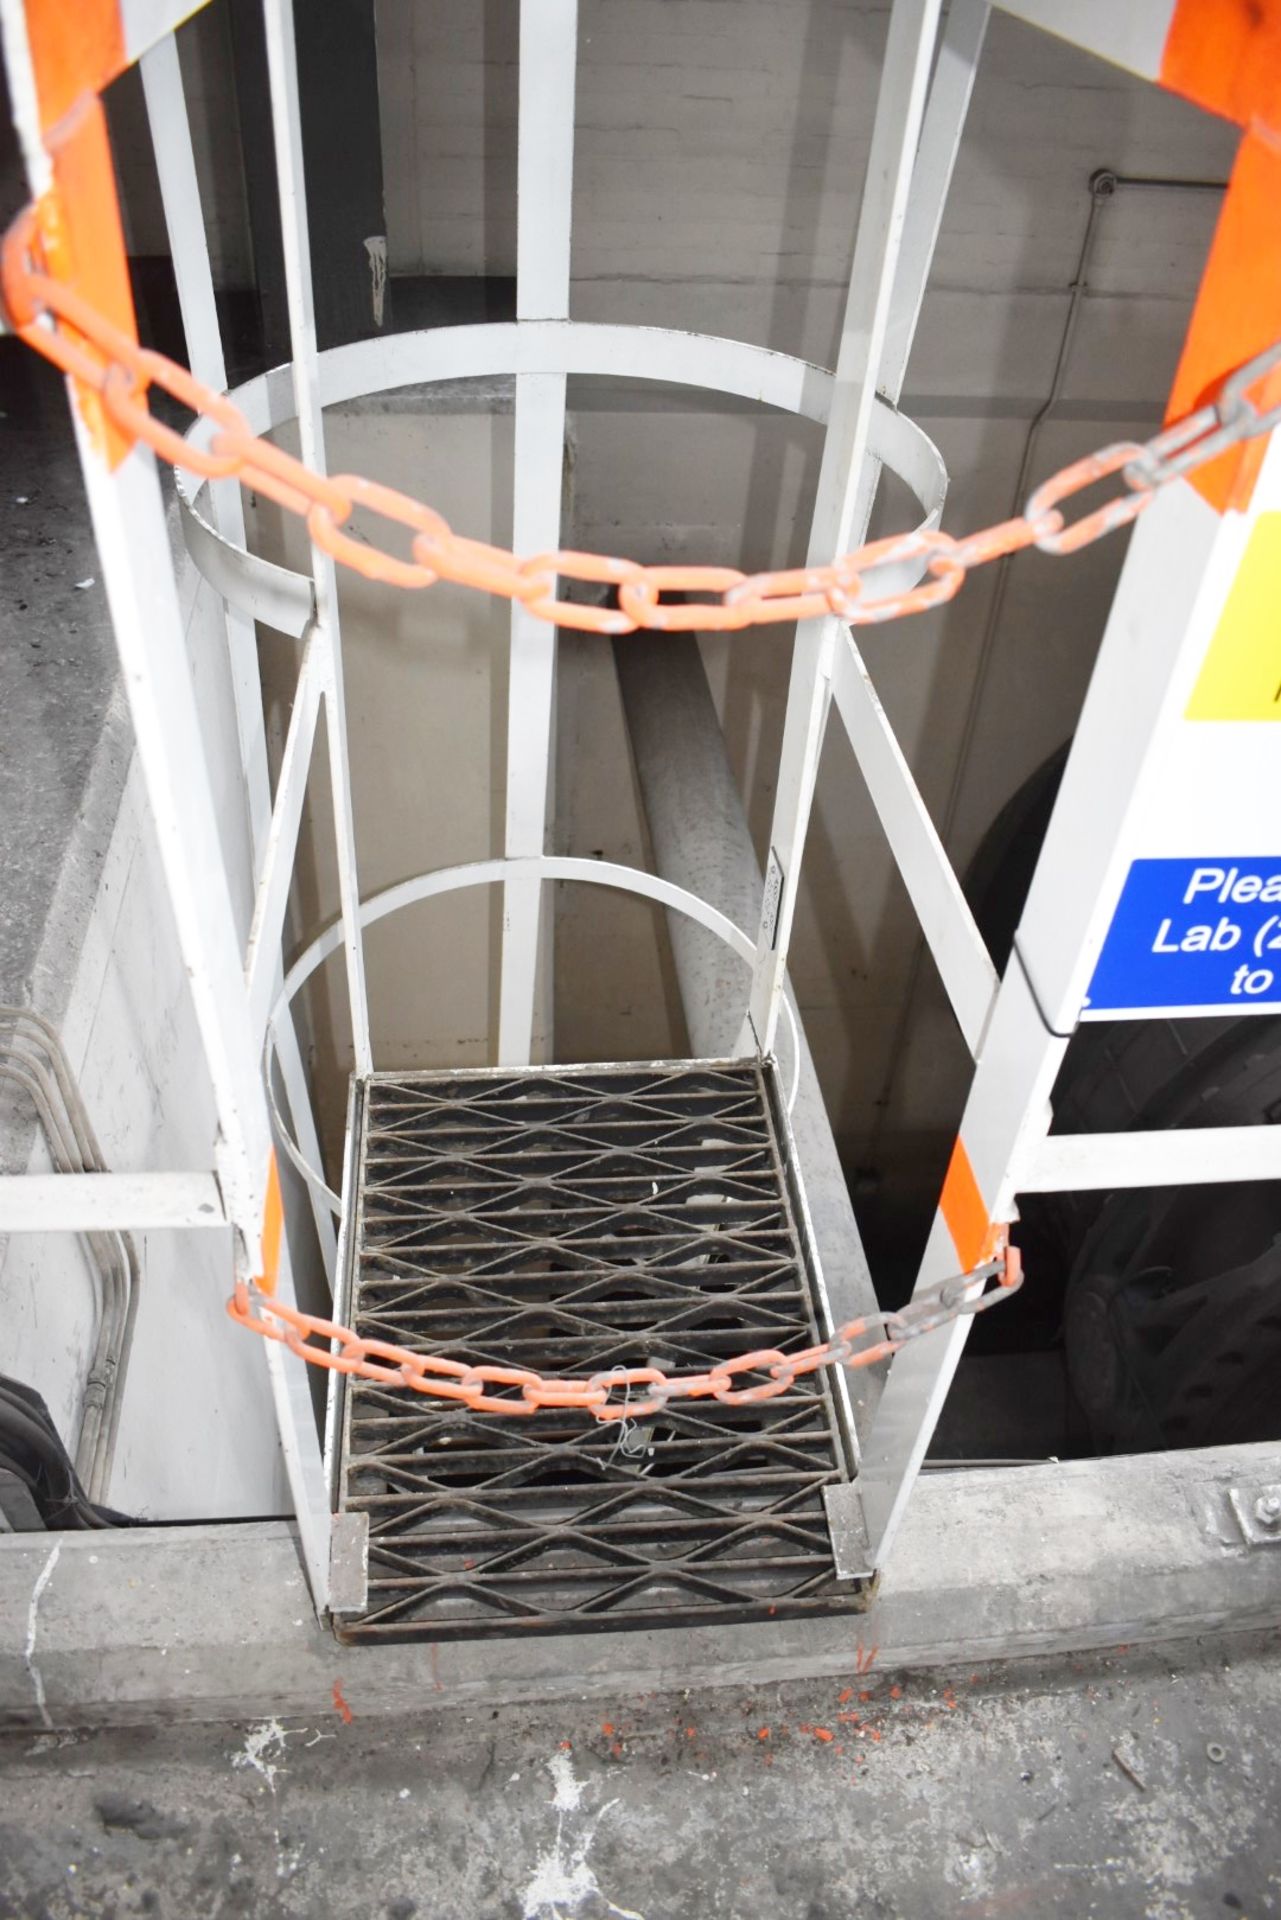 1 x Access Step Ladder With Safety Cage - Constructed From Steel - Height to Platform 550 cms - Image 6 of 6